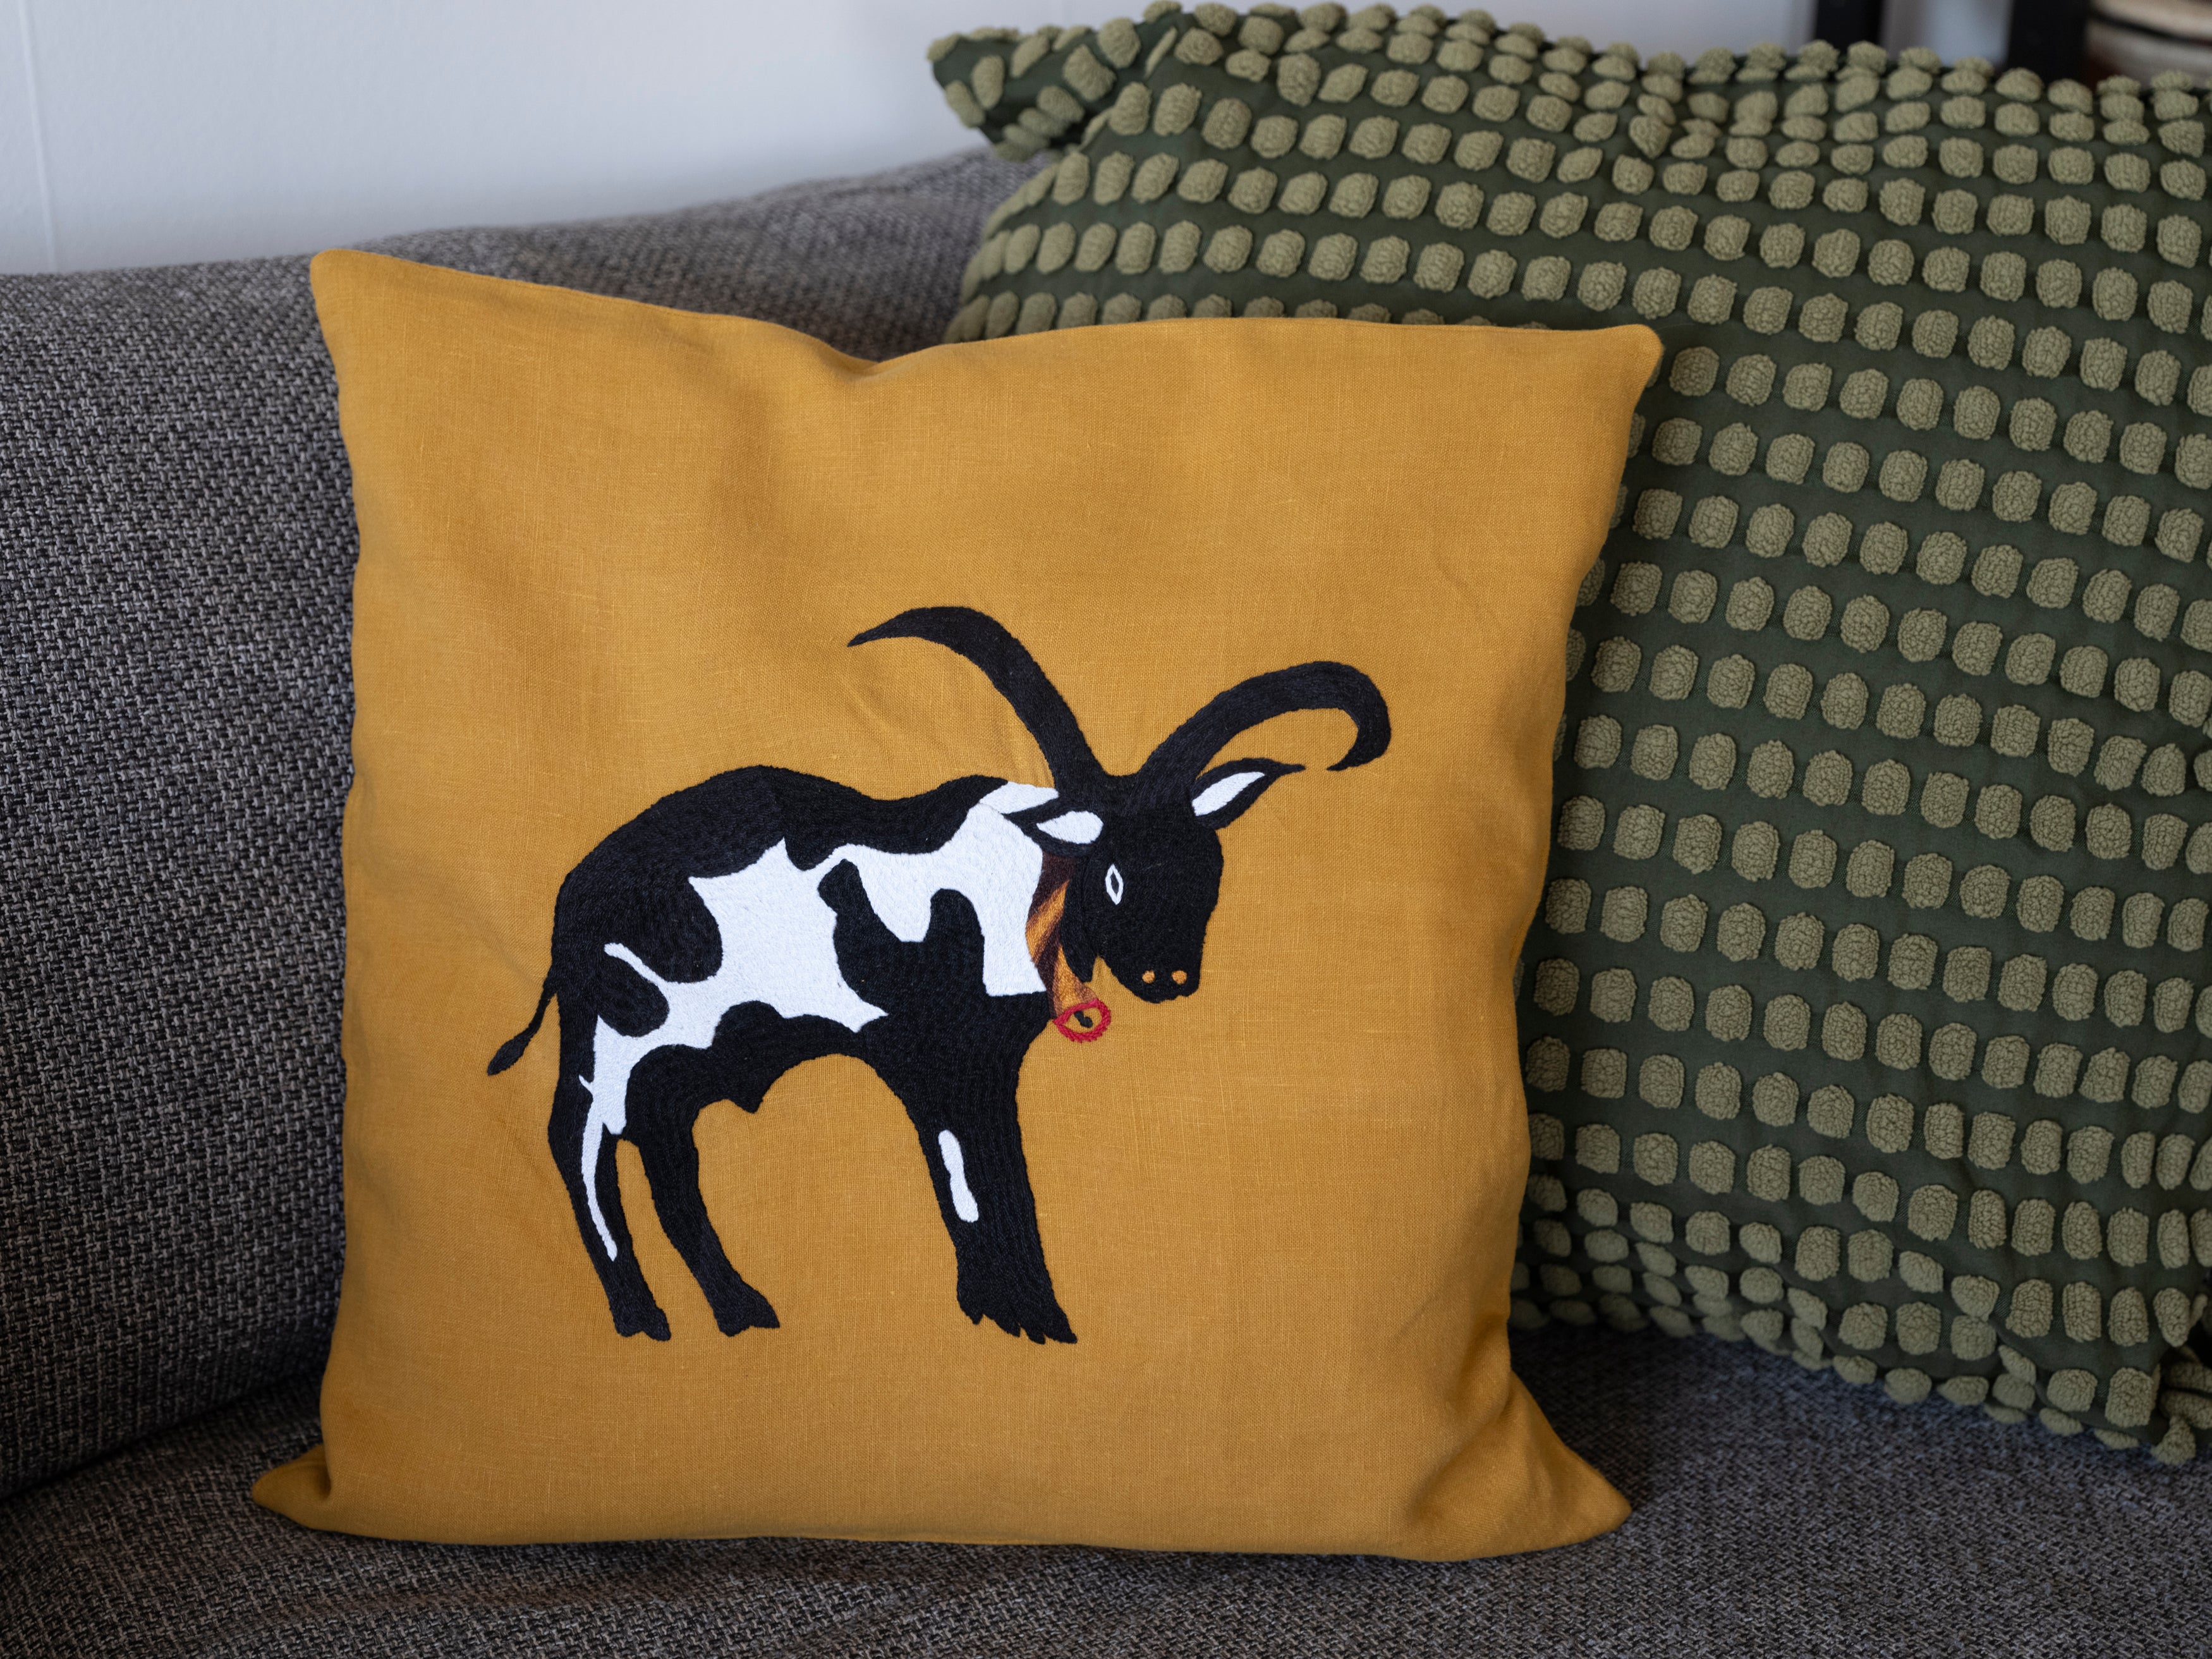 Cow pillow on yellow linen